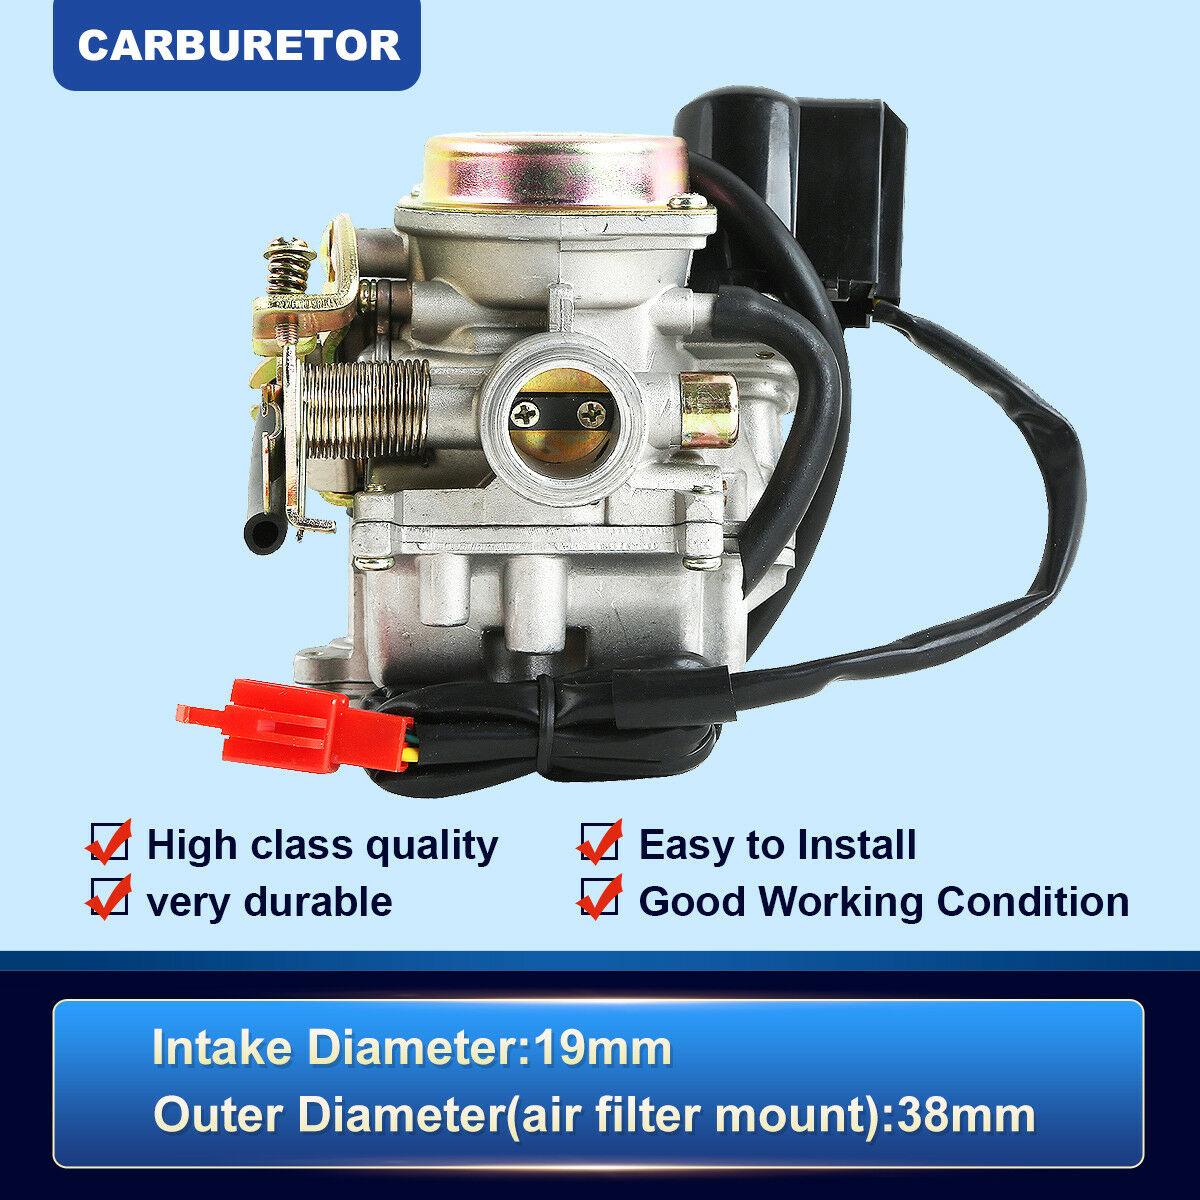 19mm 50cc SCOOTER Carb CARBURETOR~ 4 stroke chinese GY6 139QMB engine moped SUNL - Moto Life Products